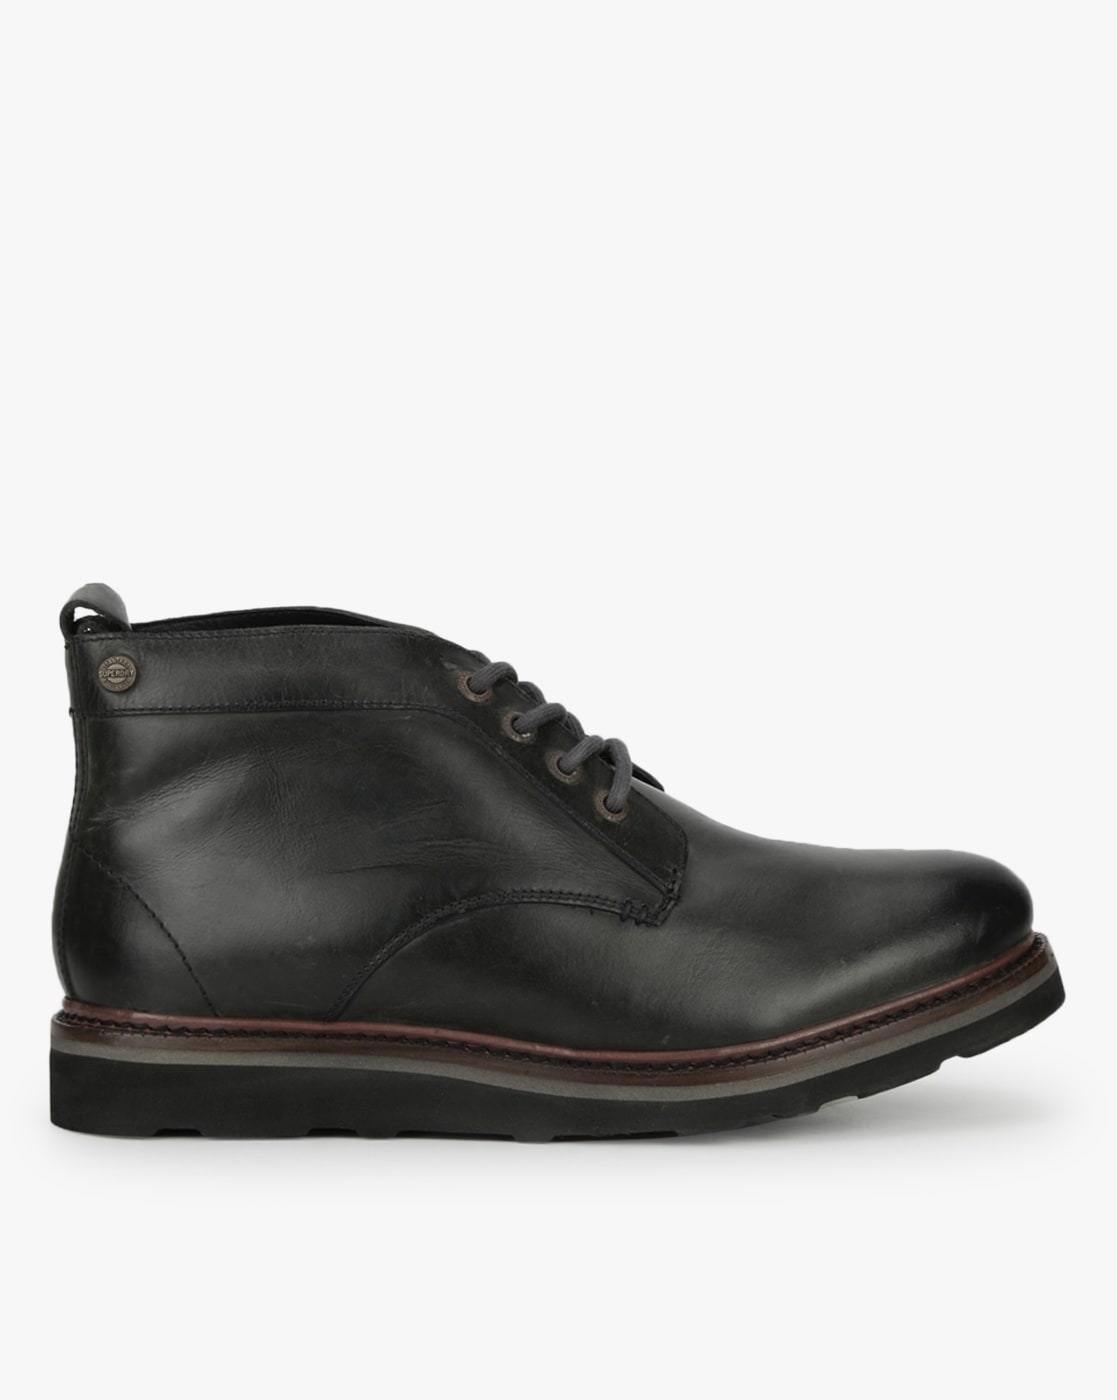 SUPERDRY Stirling Chukka Lace-Up Boots